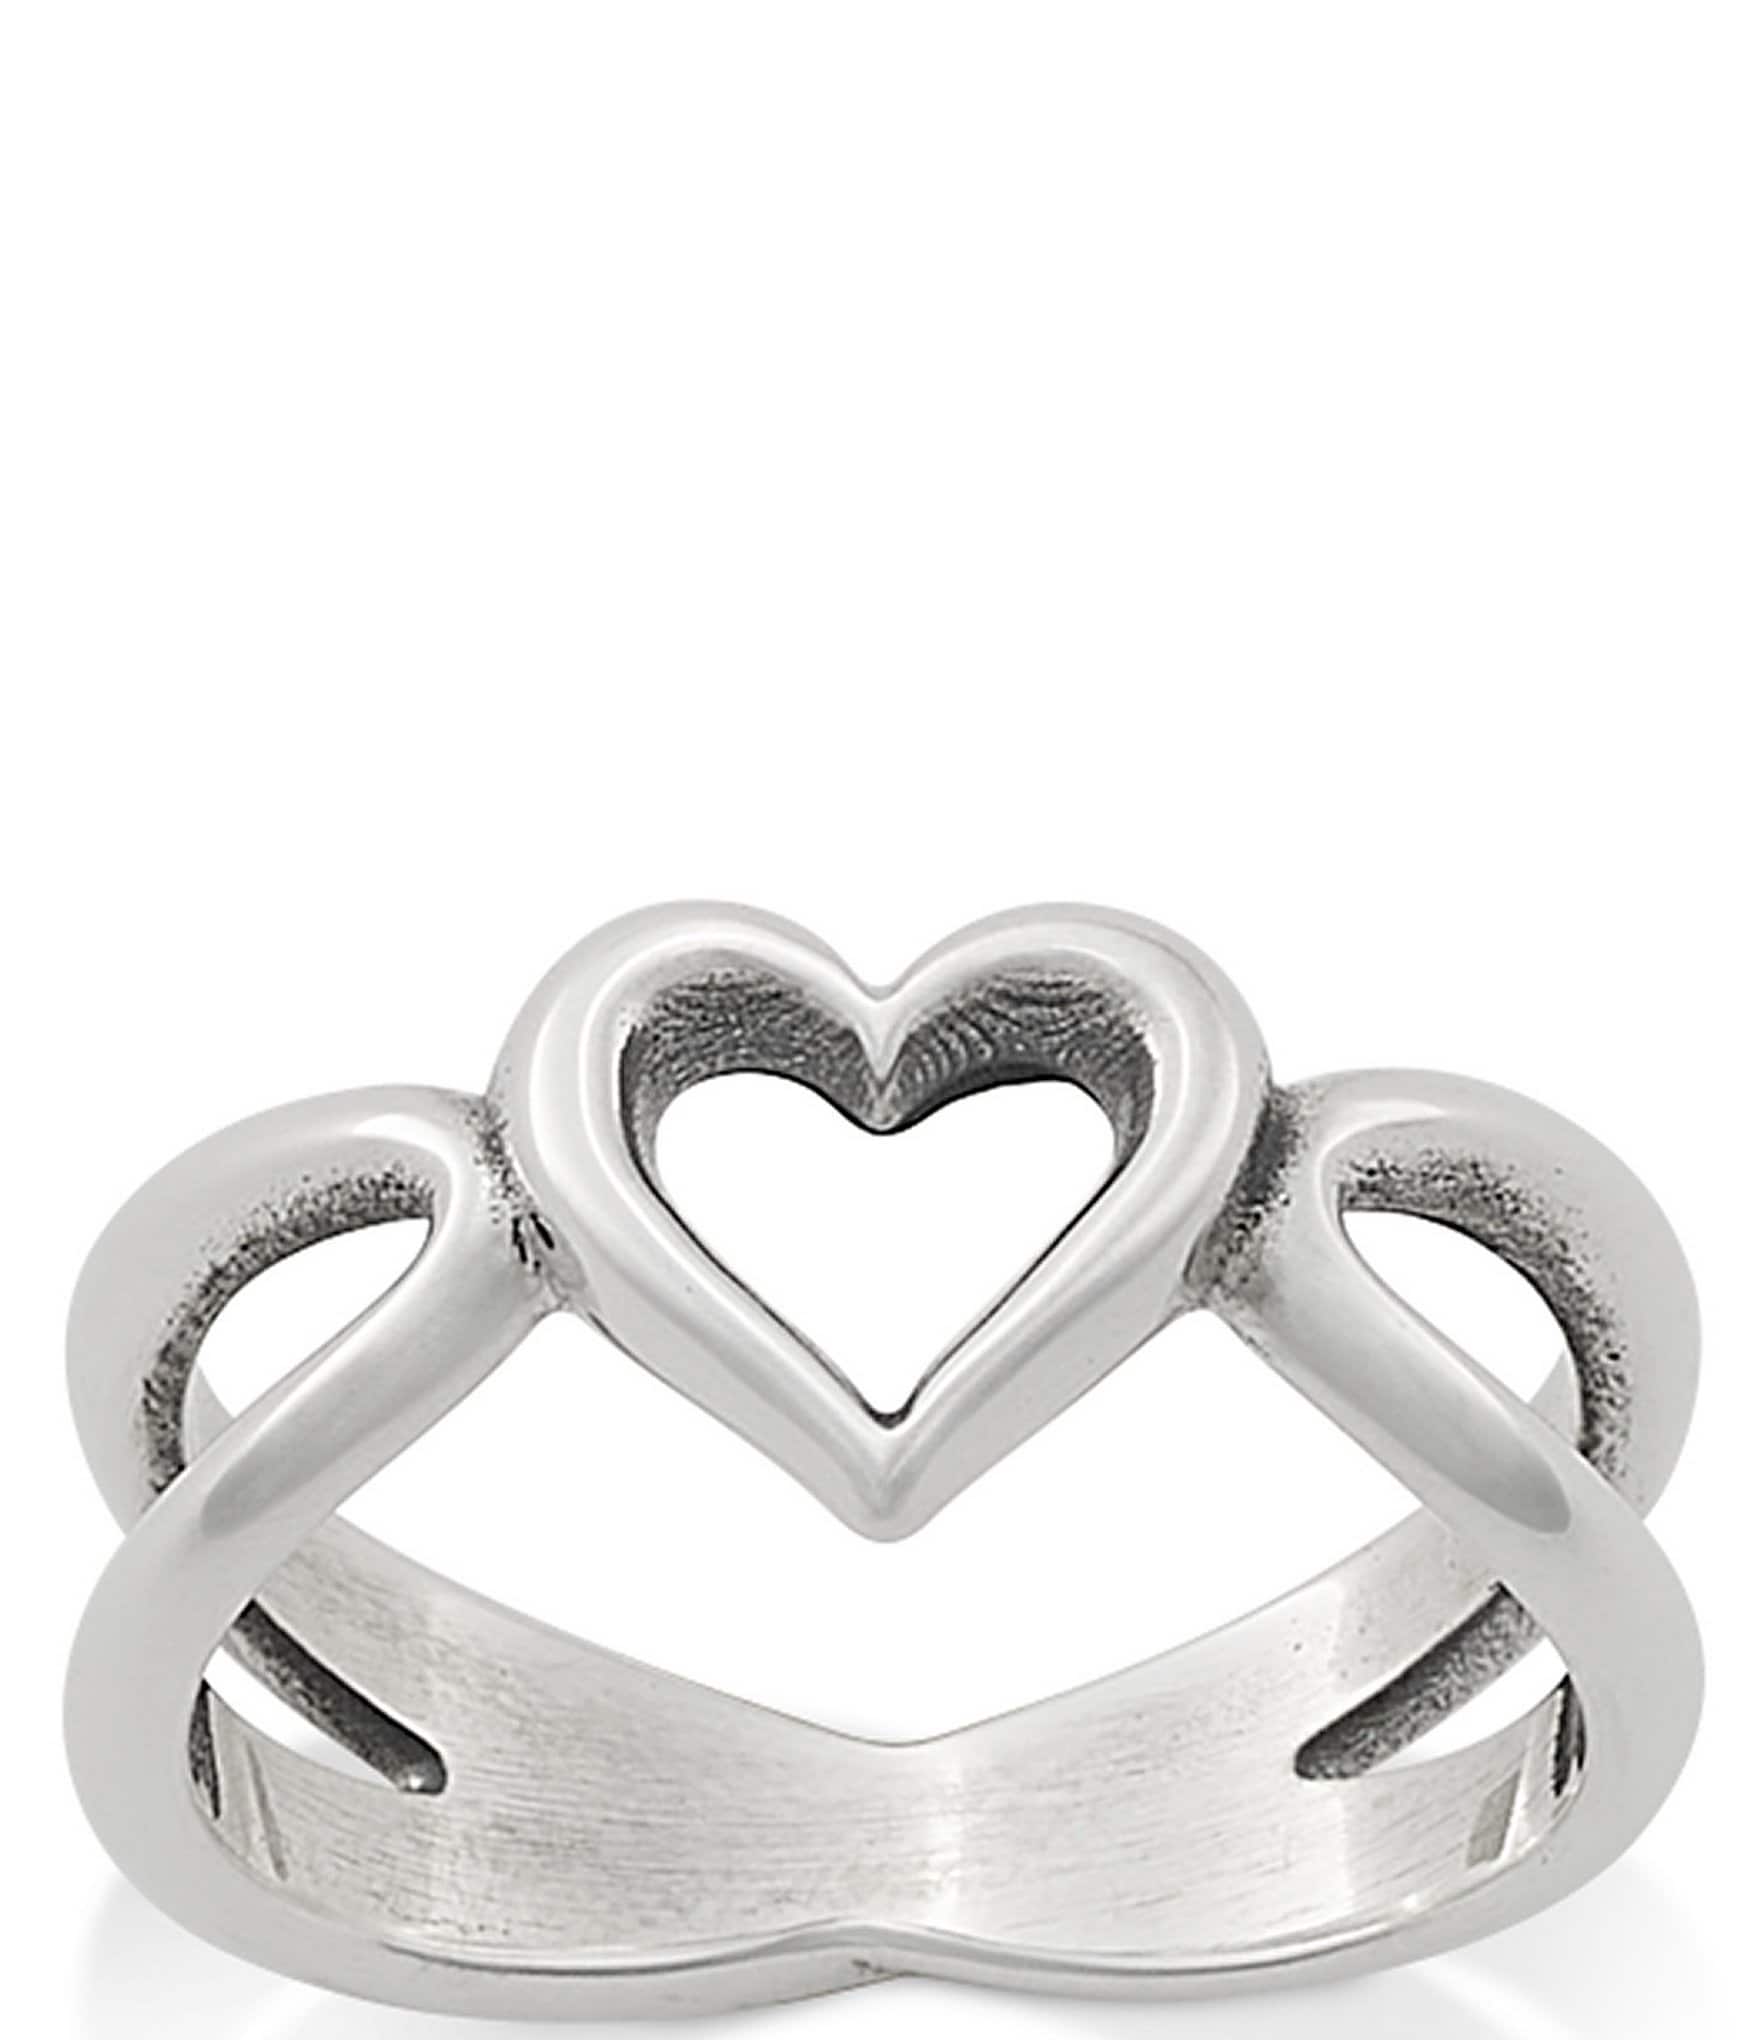 Love In Infinity Gold Couple Rings